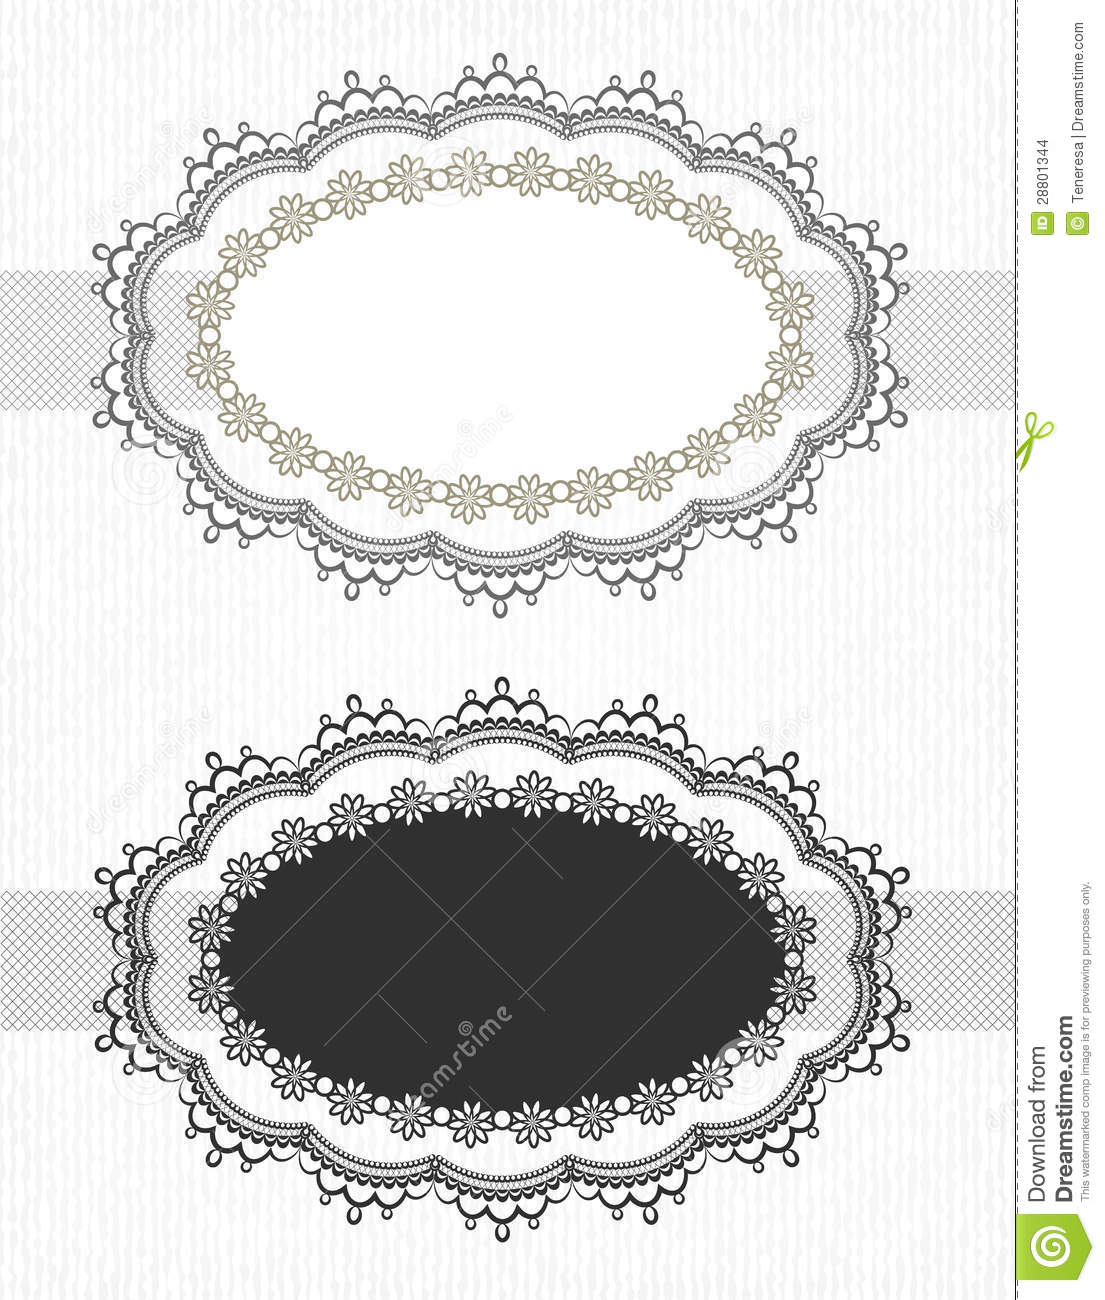 More Similar Stock Images Of   Vintage Lace Borders Set  